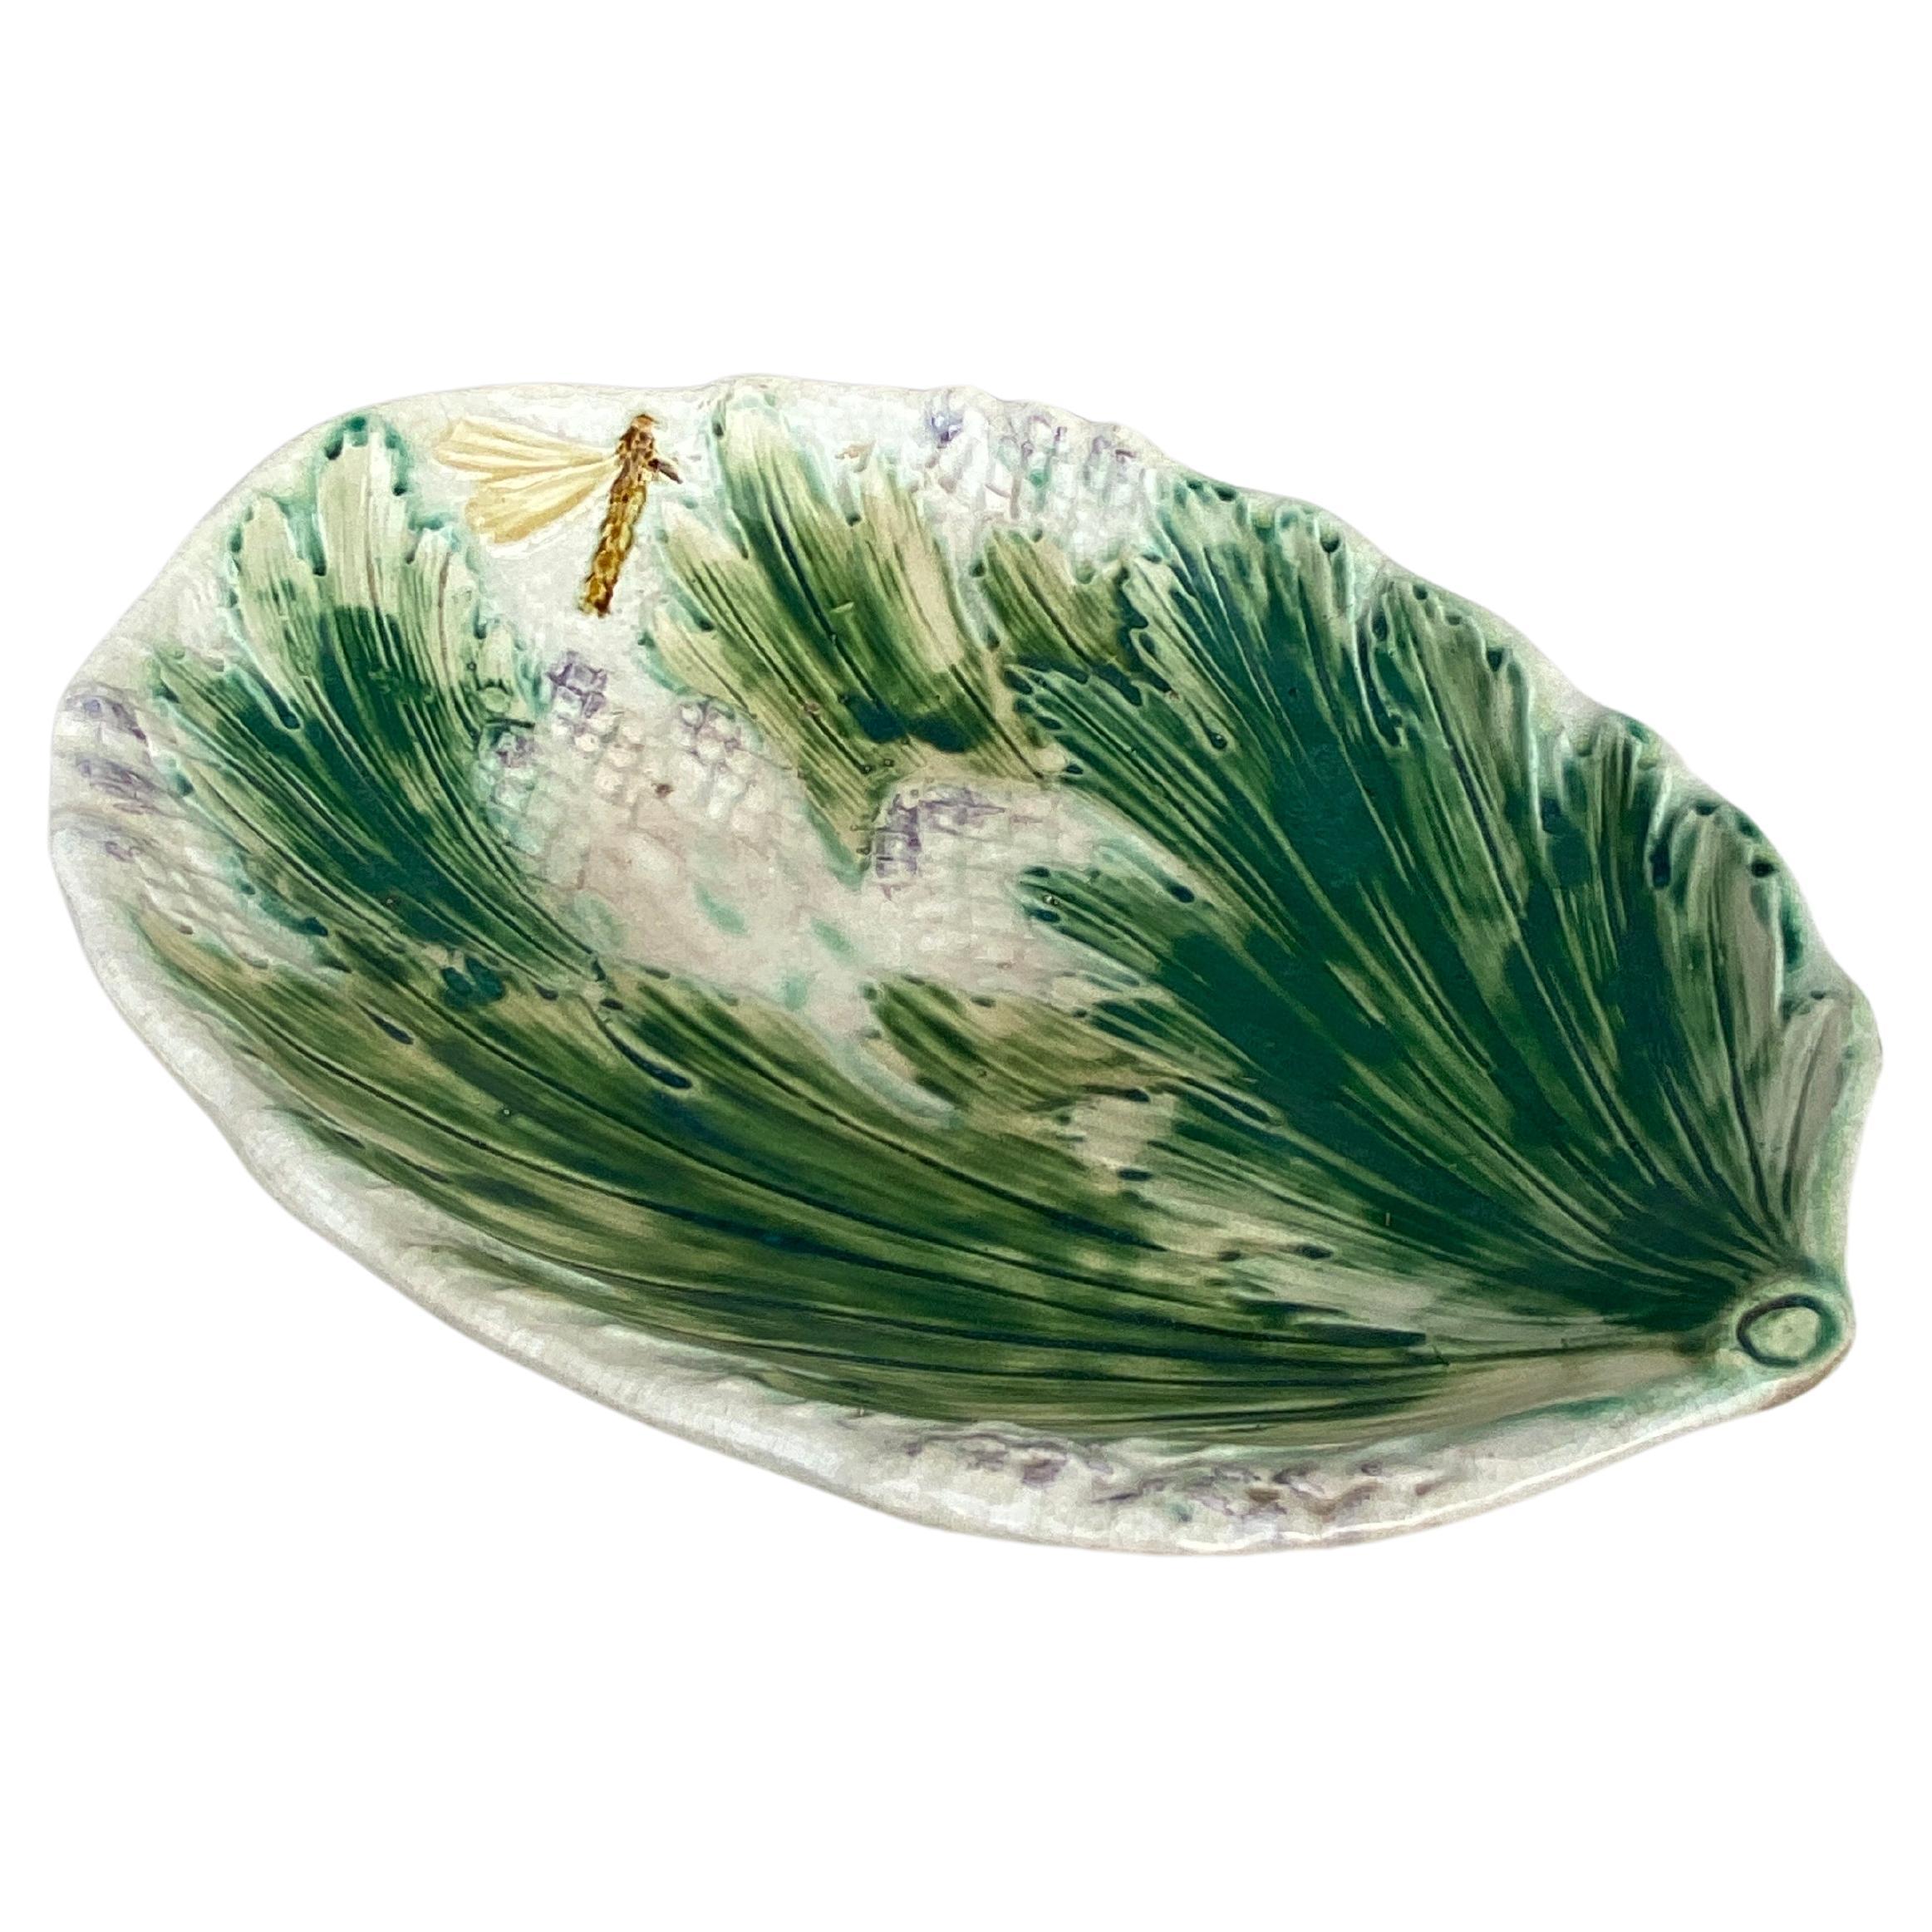 Late 19th Century Rare French Majolica Asparagus Platter, circa 1880 For Sale